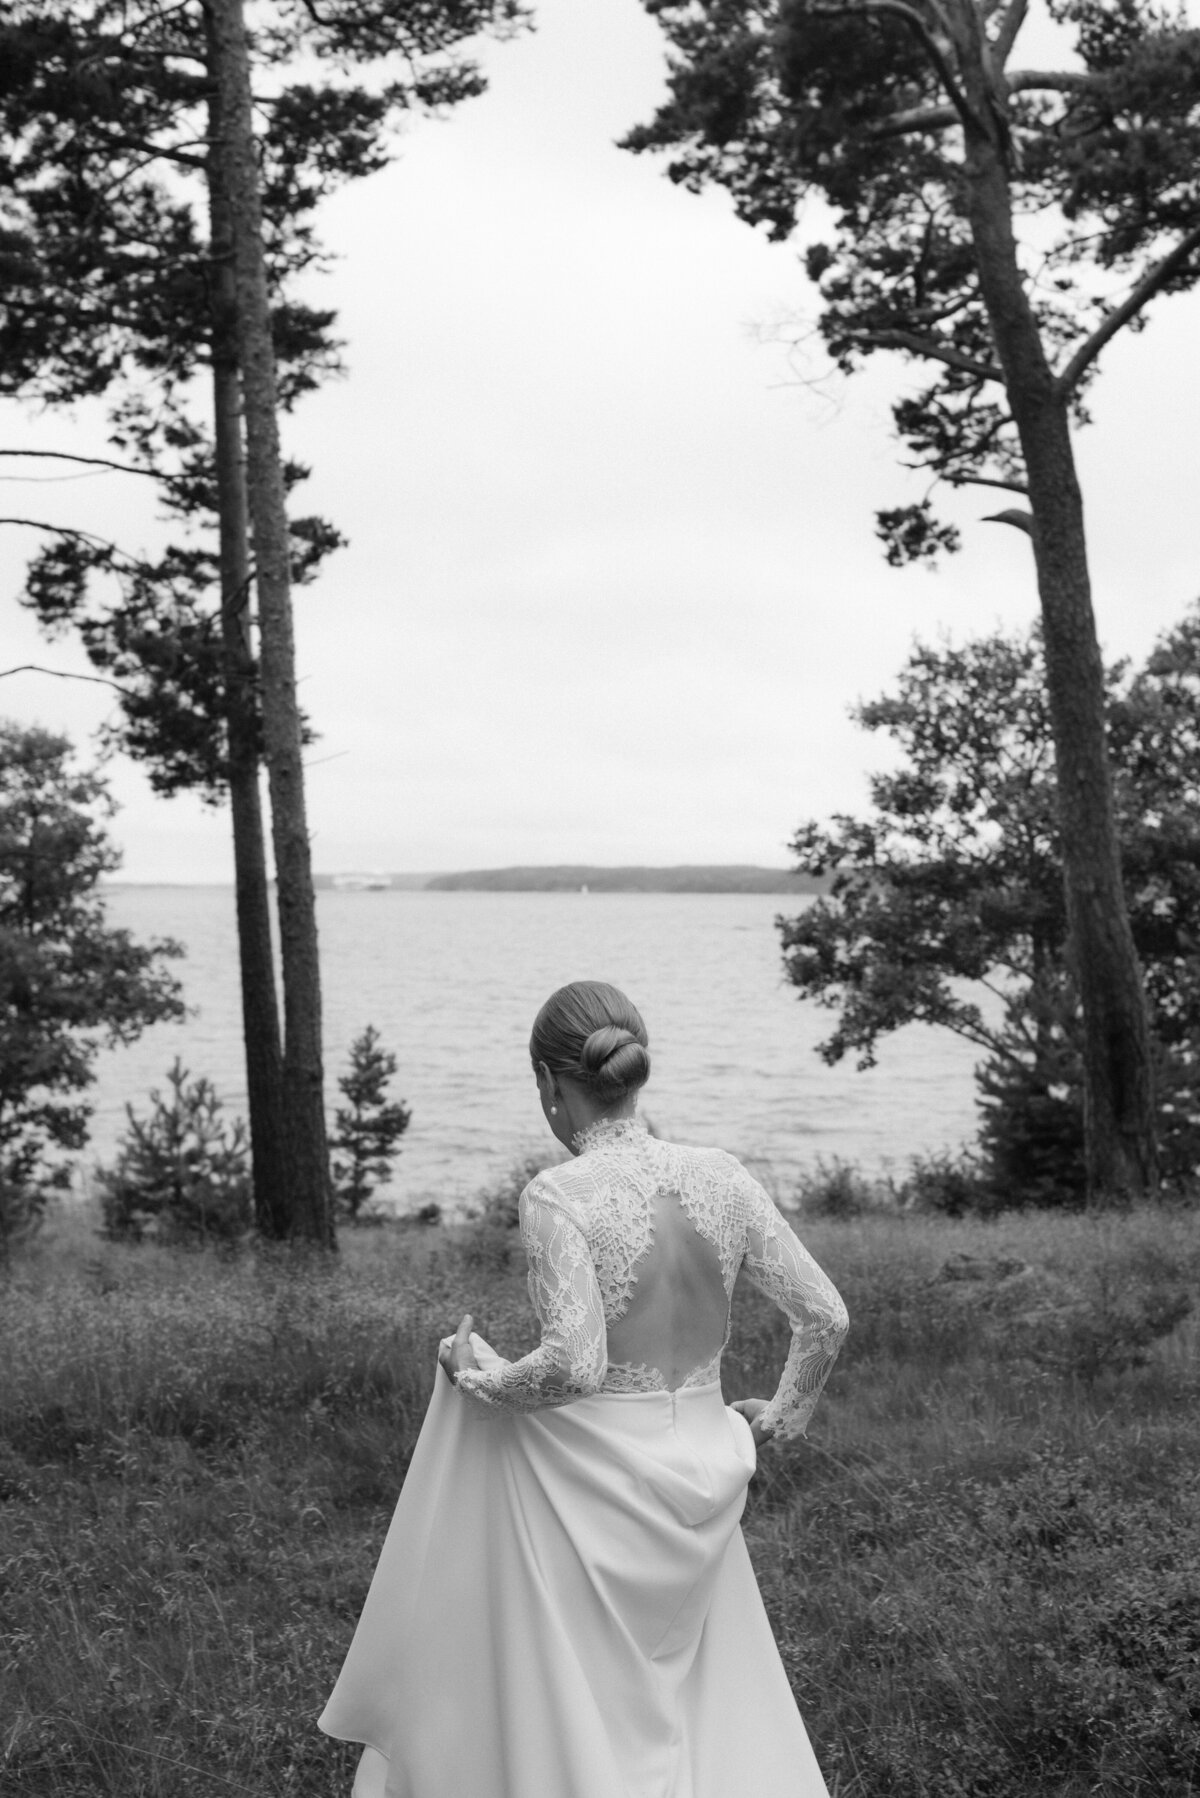 The bride outside the wedding venue Airisniemen kartano. The sea is on the background. An image by wedding photographer Hannika Gabrielsson.